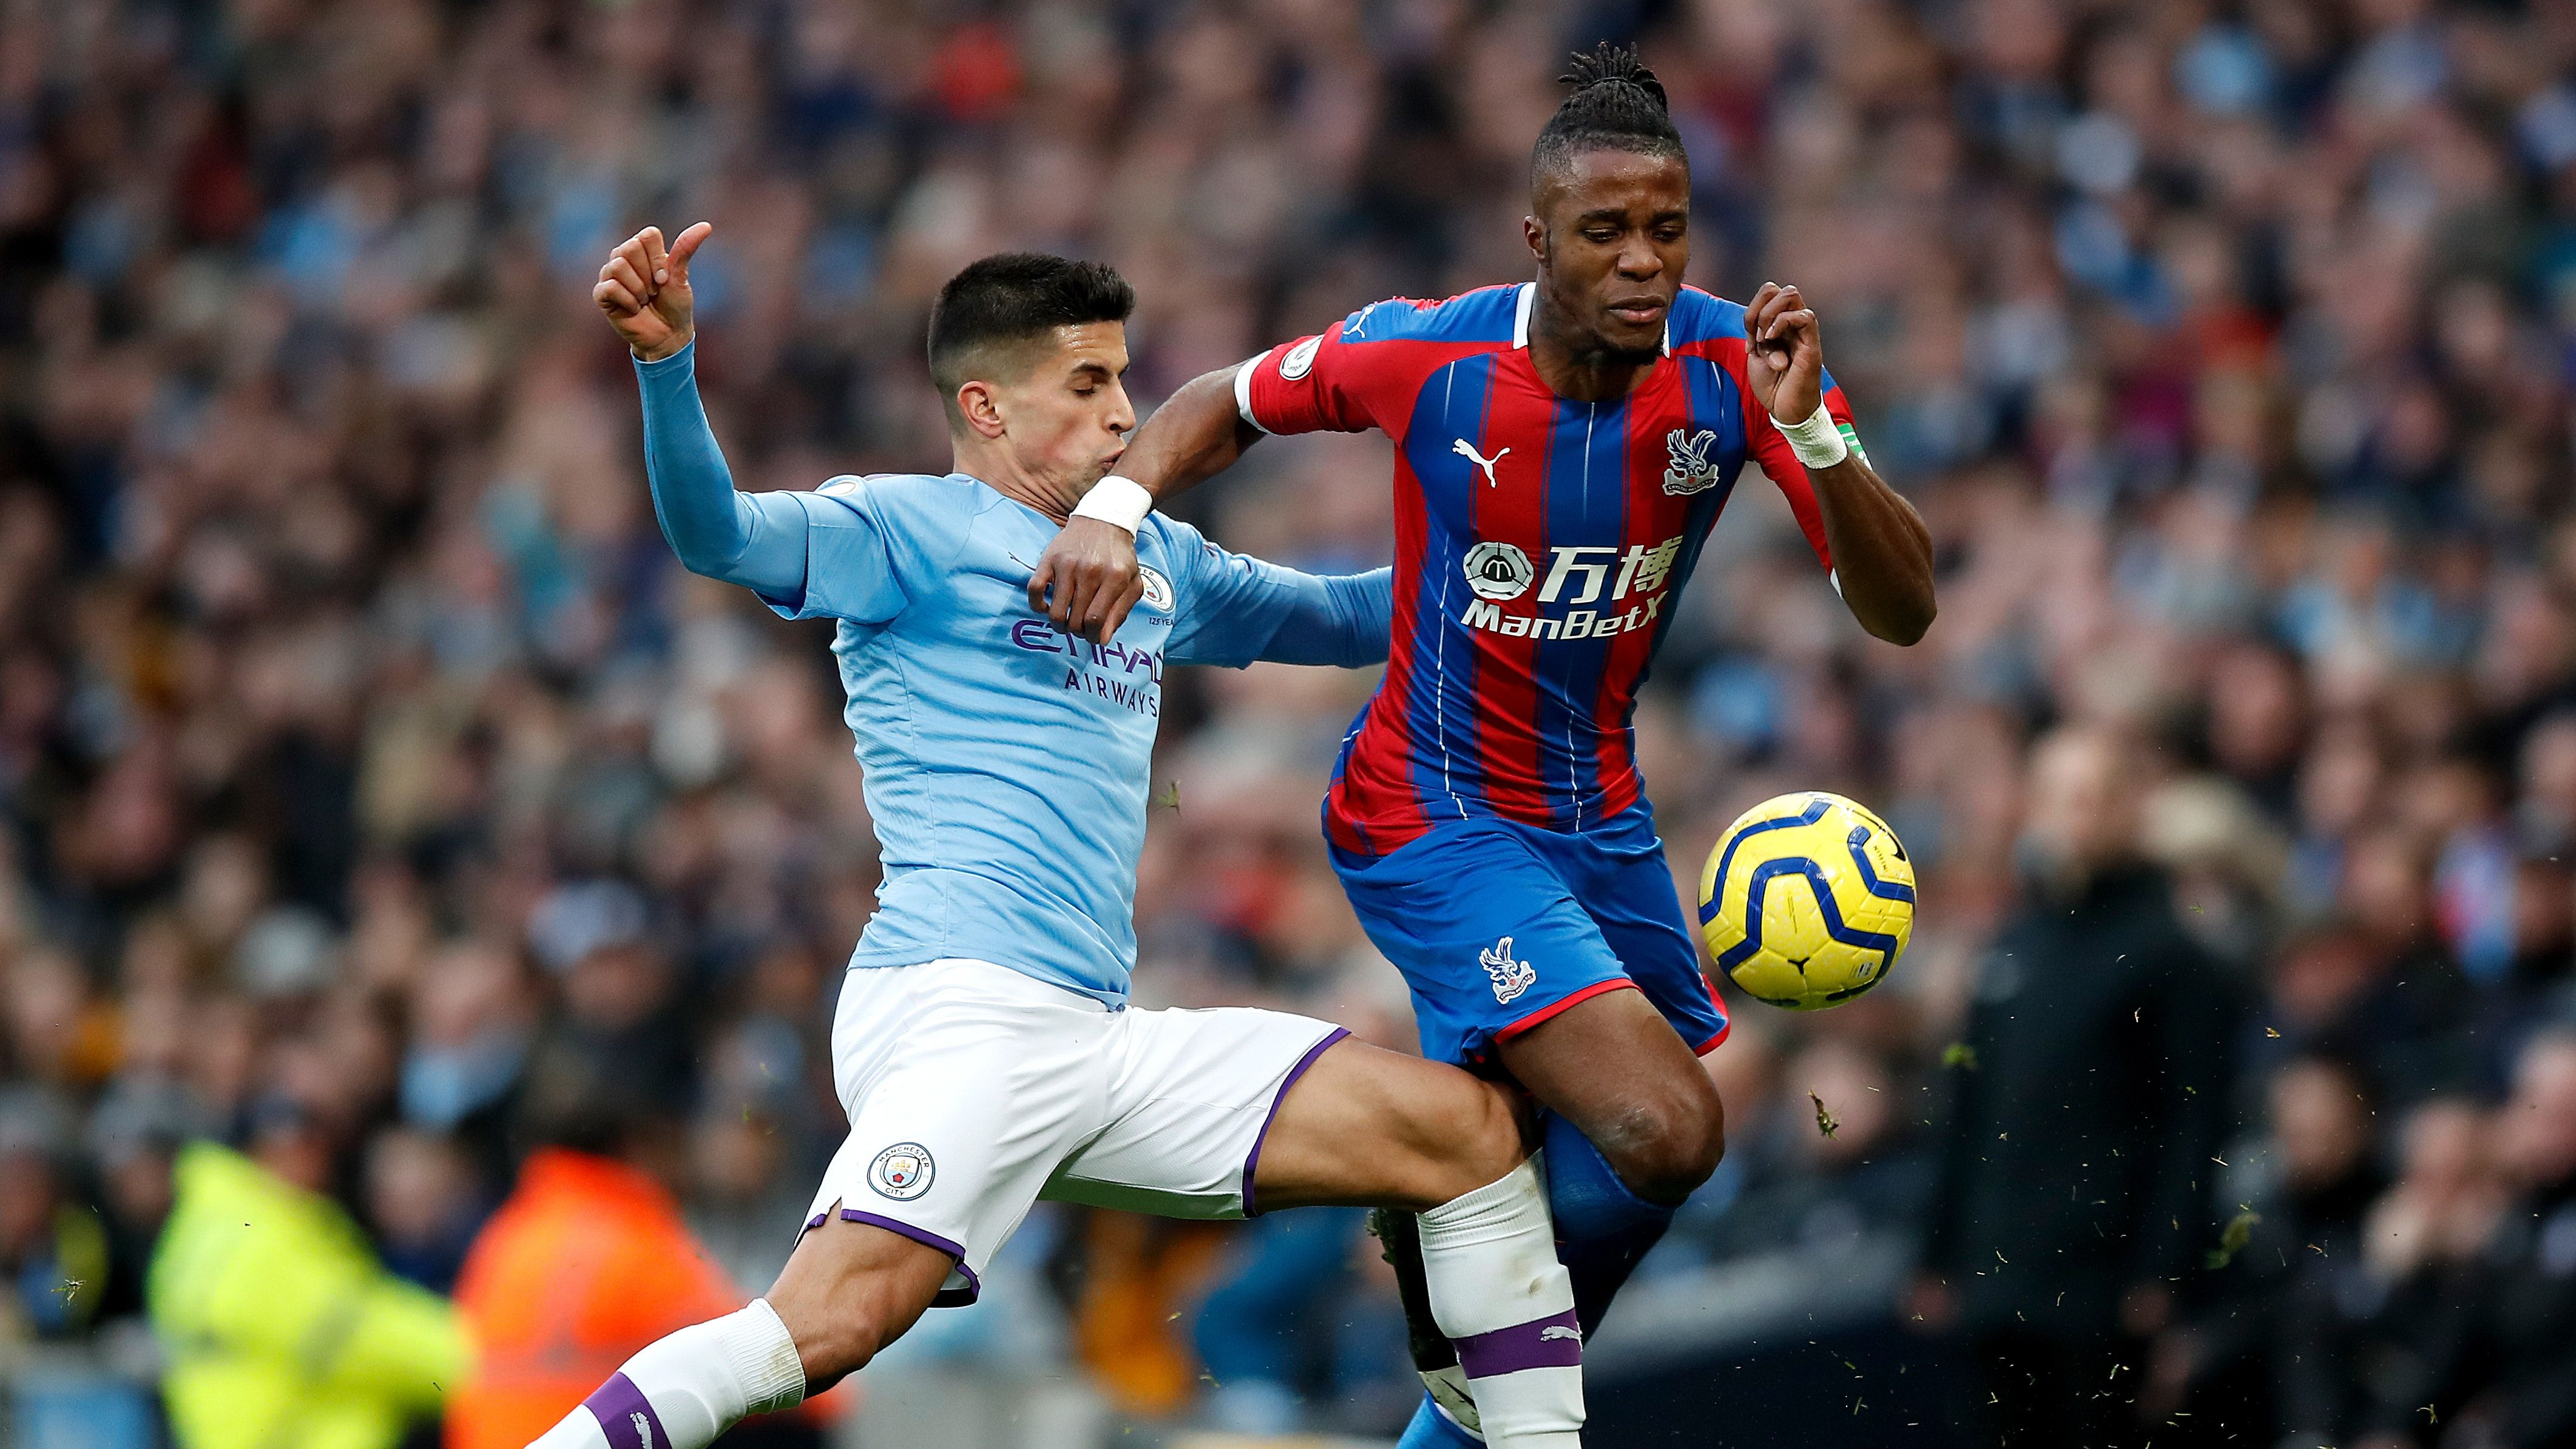 fernandinho own goal sees Man City draw 2-2 with Crystal Palace